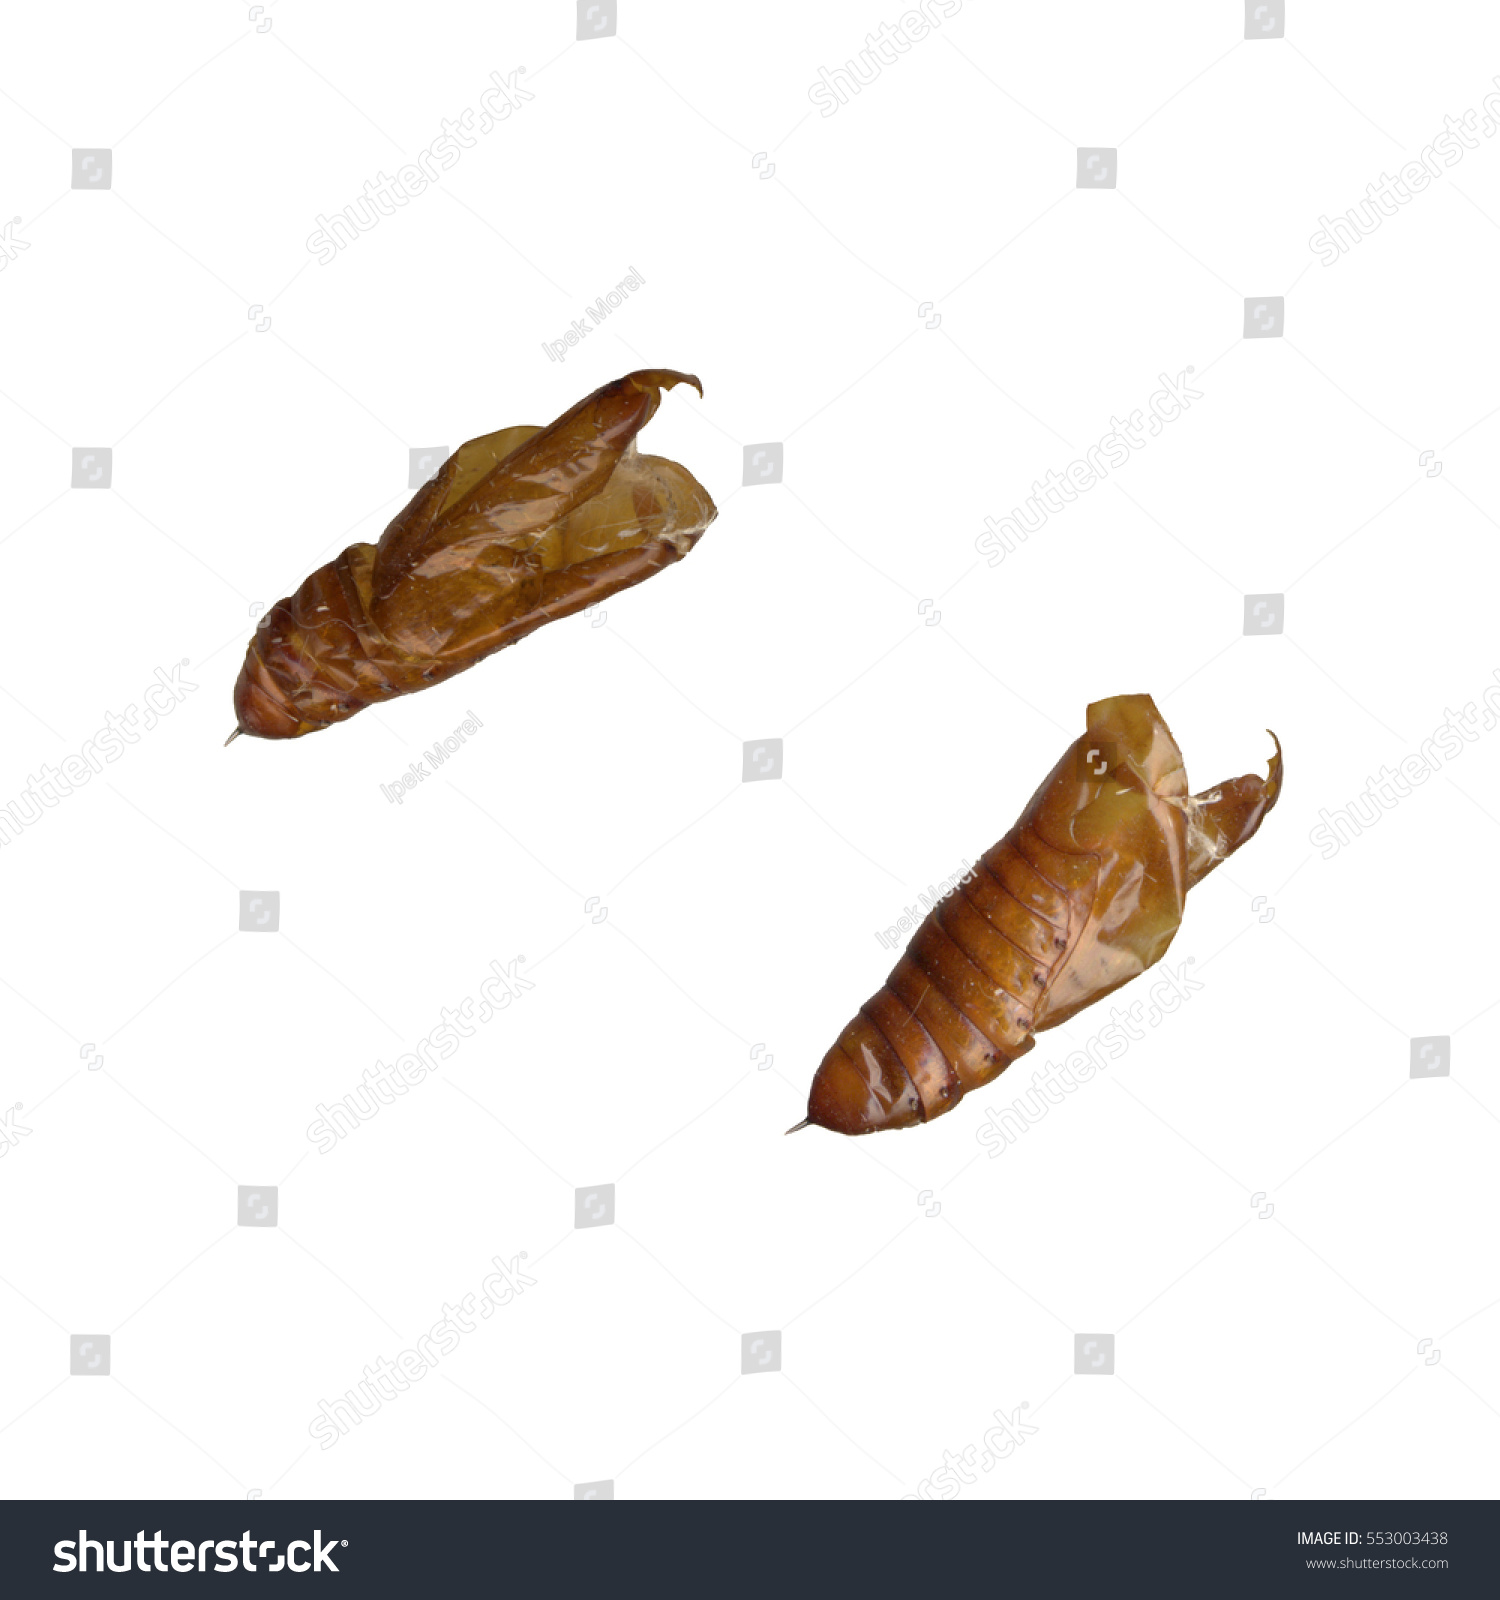 Two sides of caterpillar cocoon on a white background #553003438